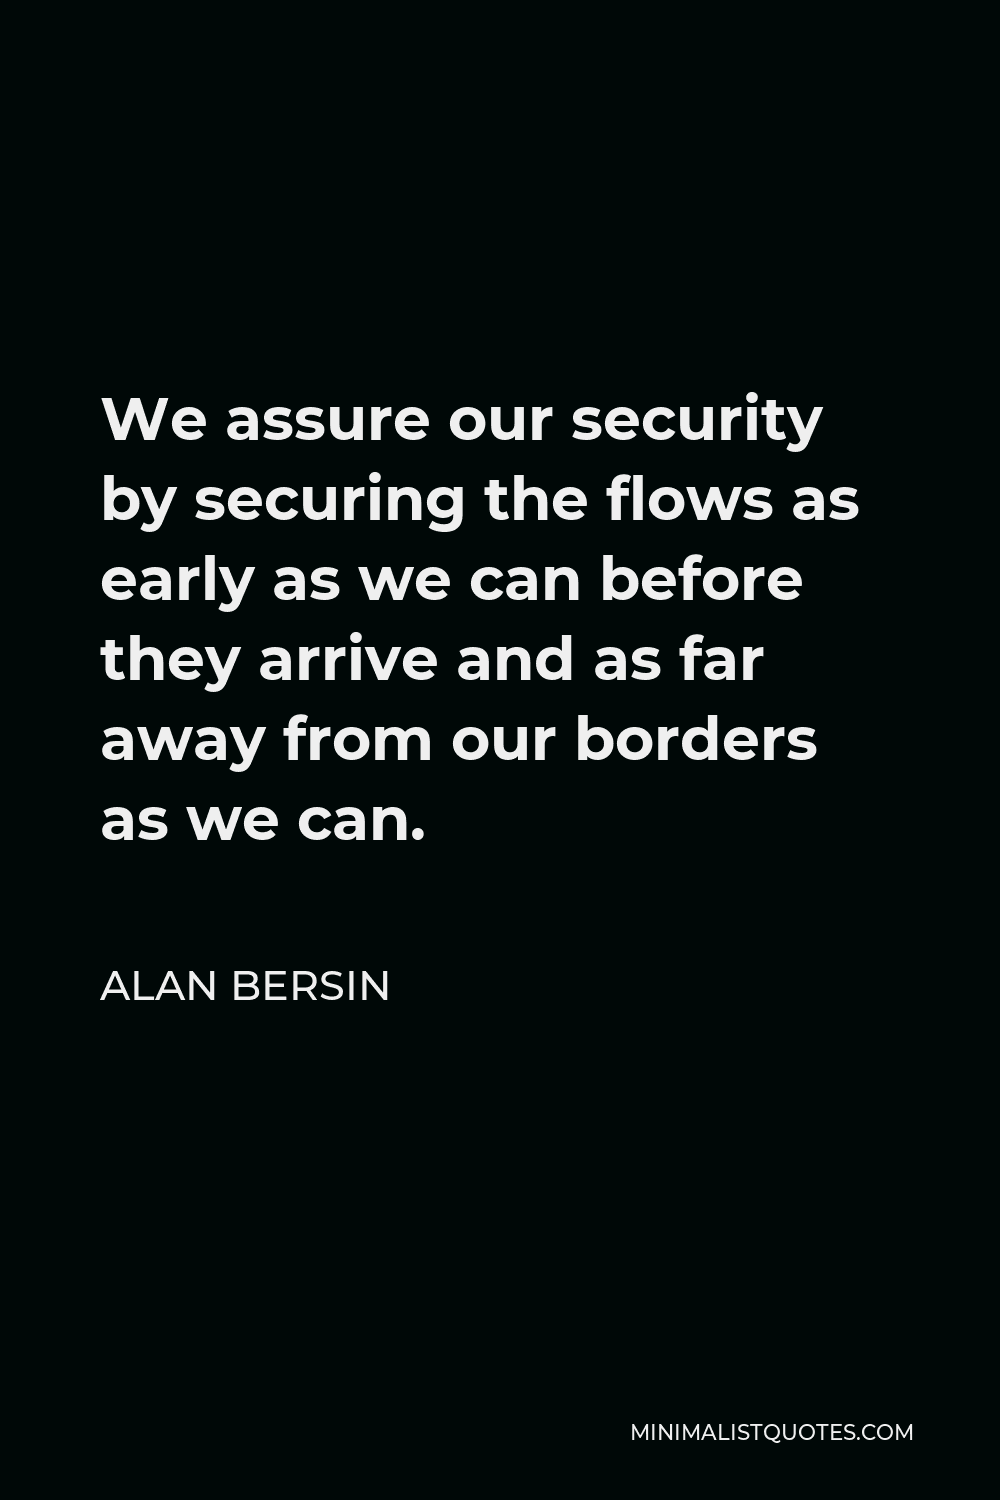 Alan Bersin Quote - We assure our security by securing the flows as early as we can before they arrive and as far away from our borders as we can.